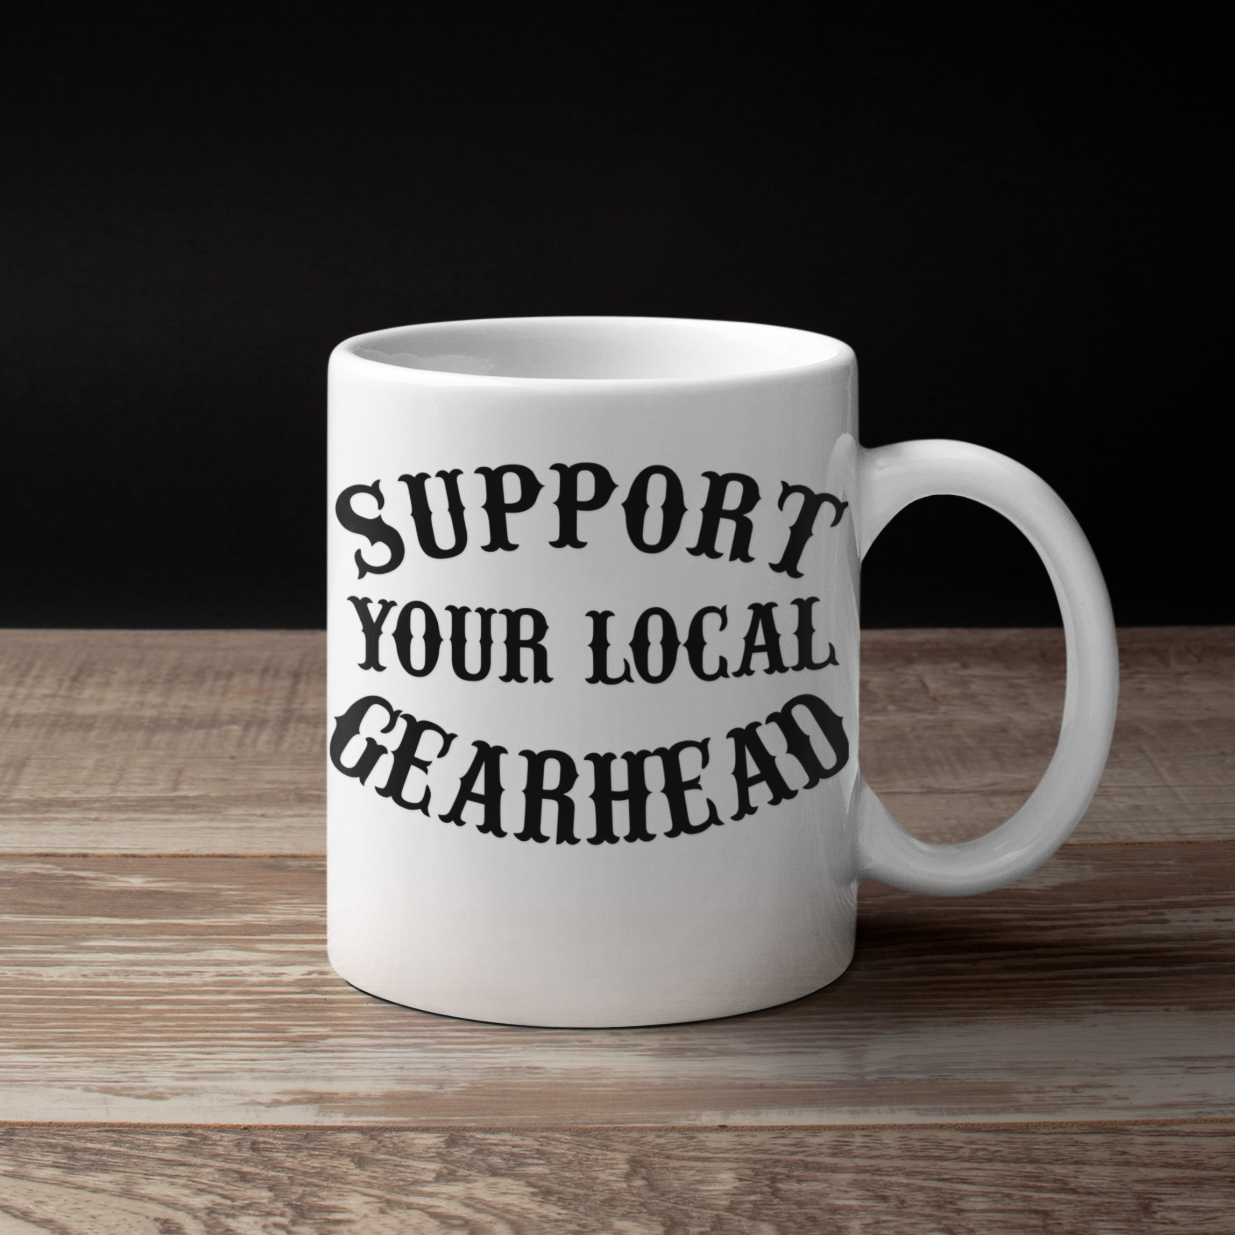 Support Your Local Gearhead Mug